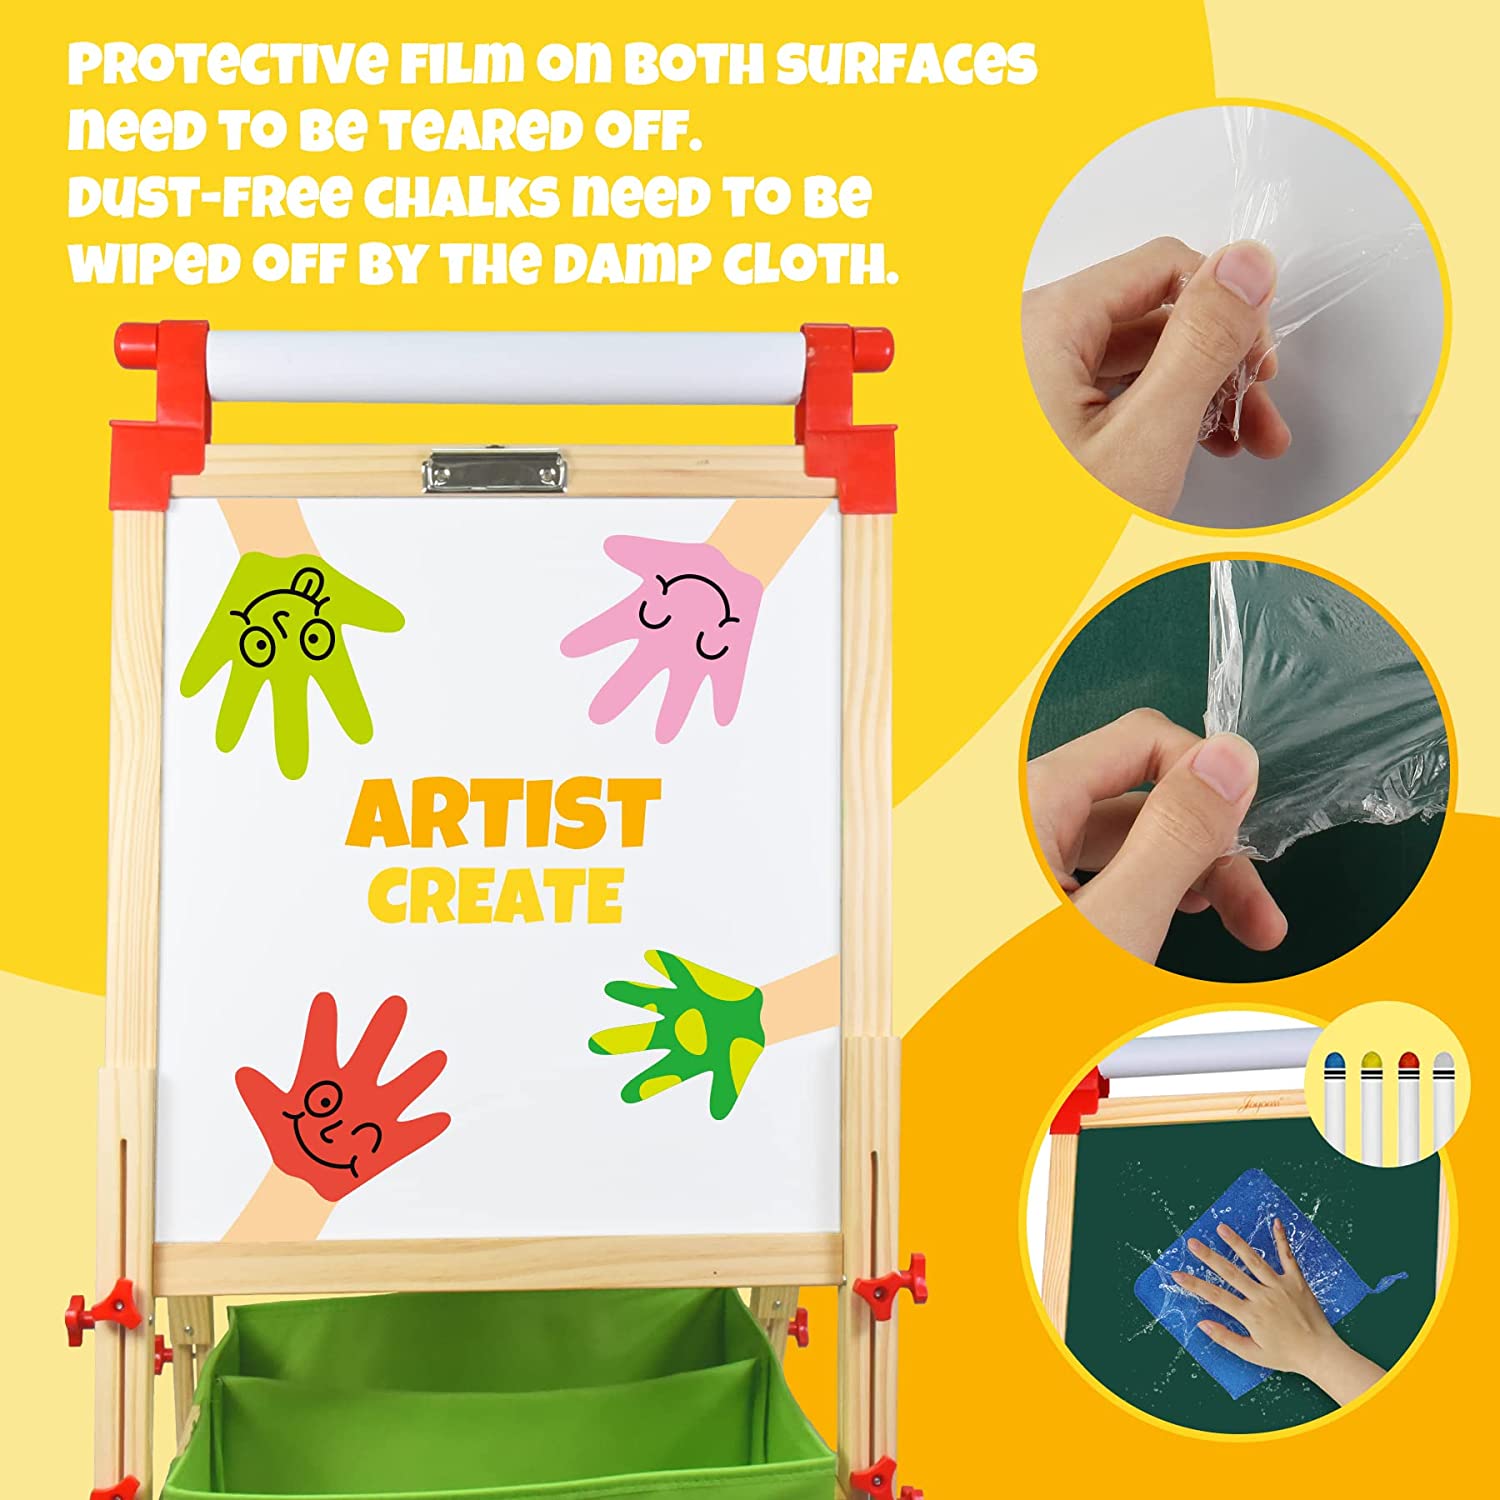 Joyooss Easel for Kids with Paper Roll, Double-Sided Magnetic Chalkboard & Whiteboard 3 in 1 Wooden Easel with Bonus Art Supplies Storage Box for 3-12 Years